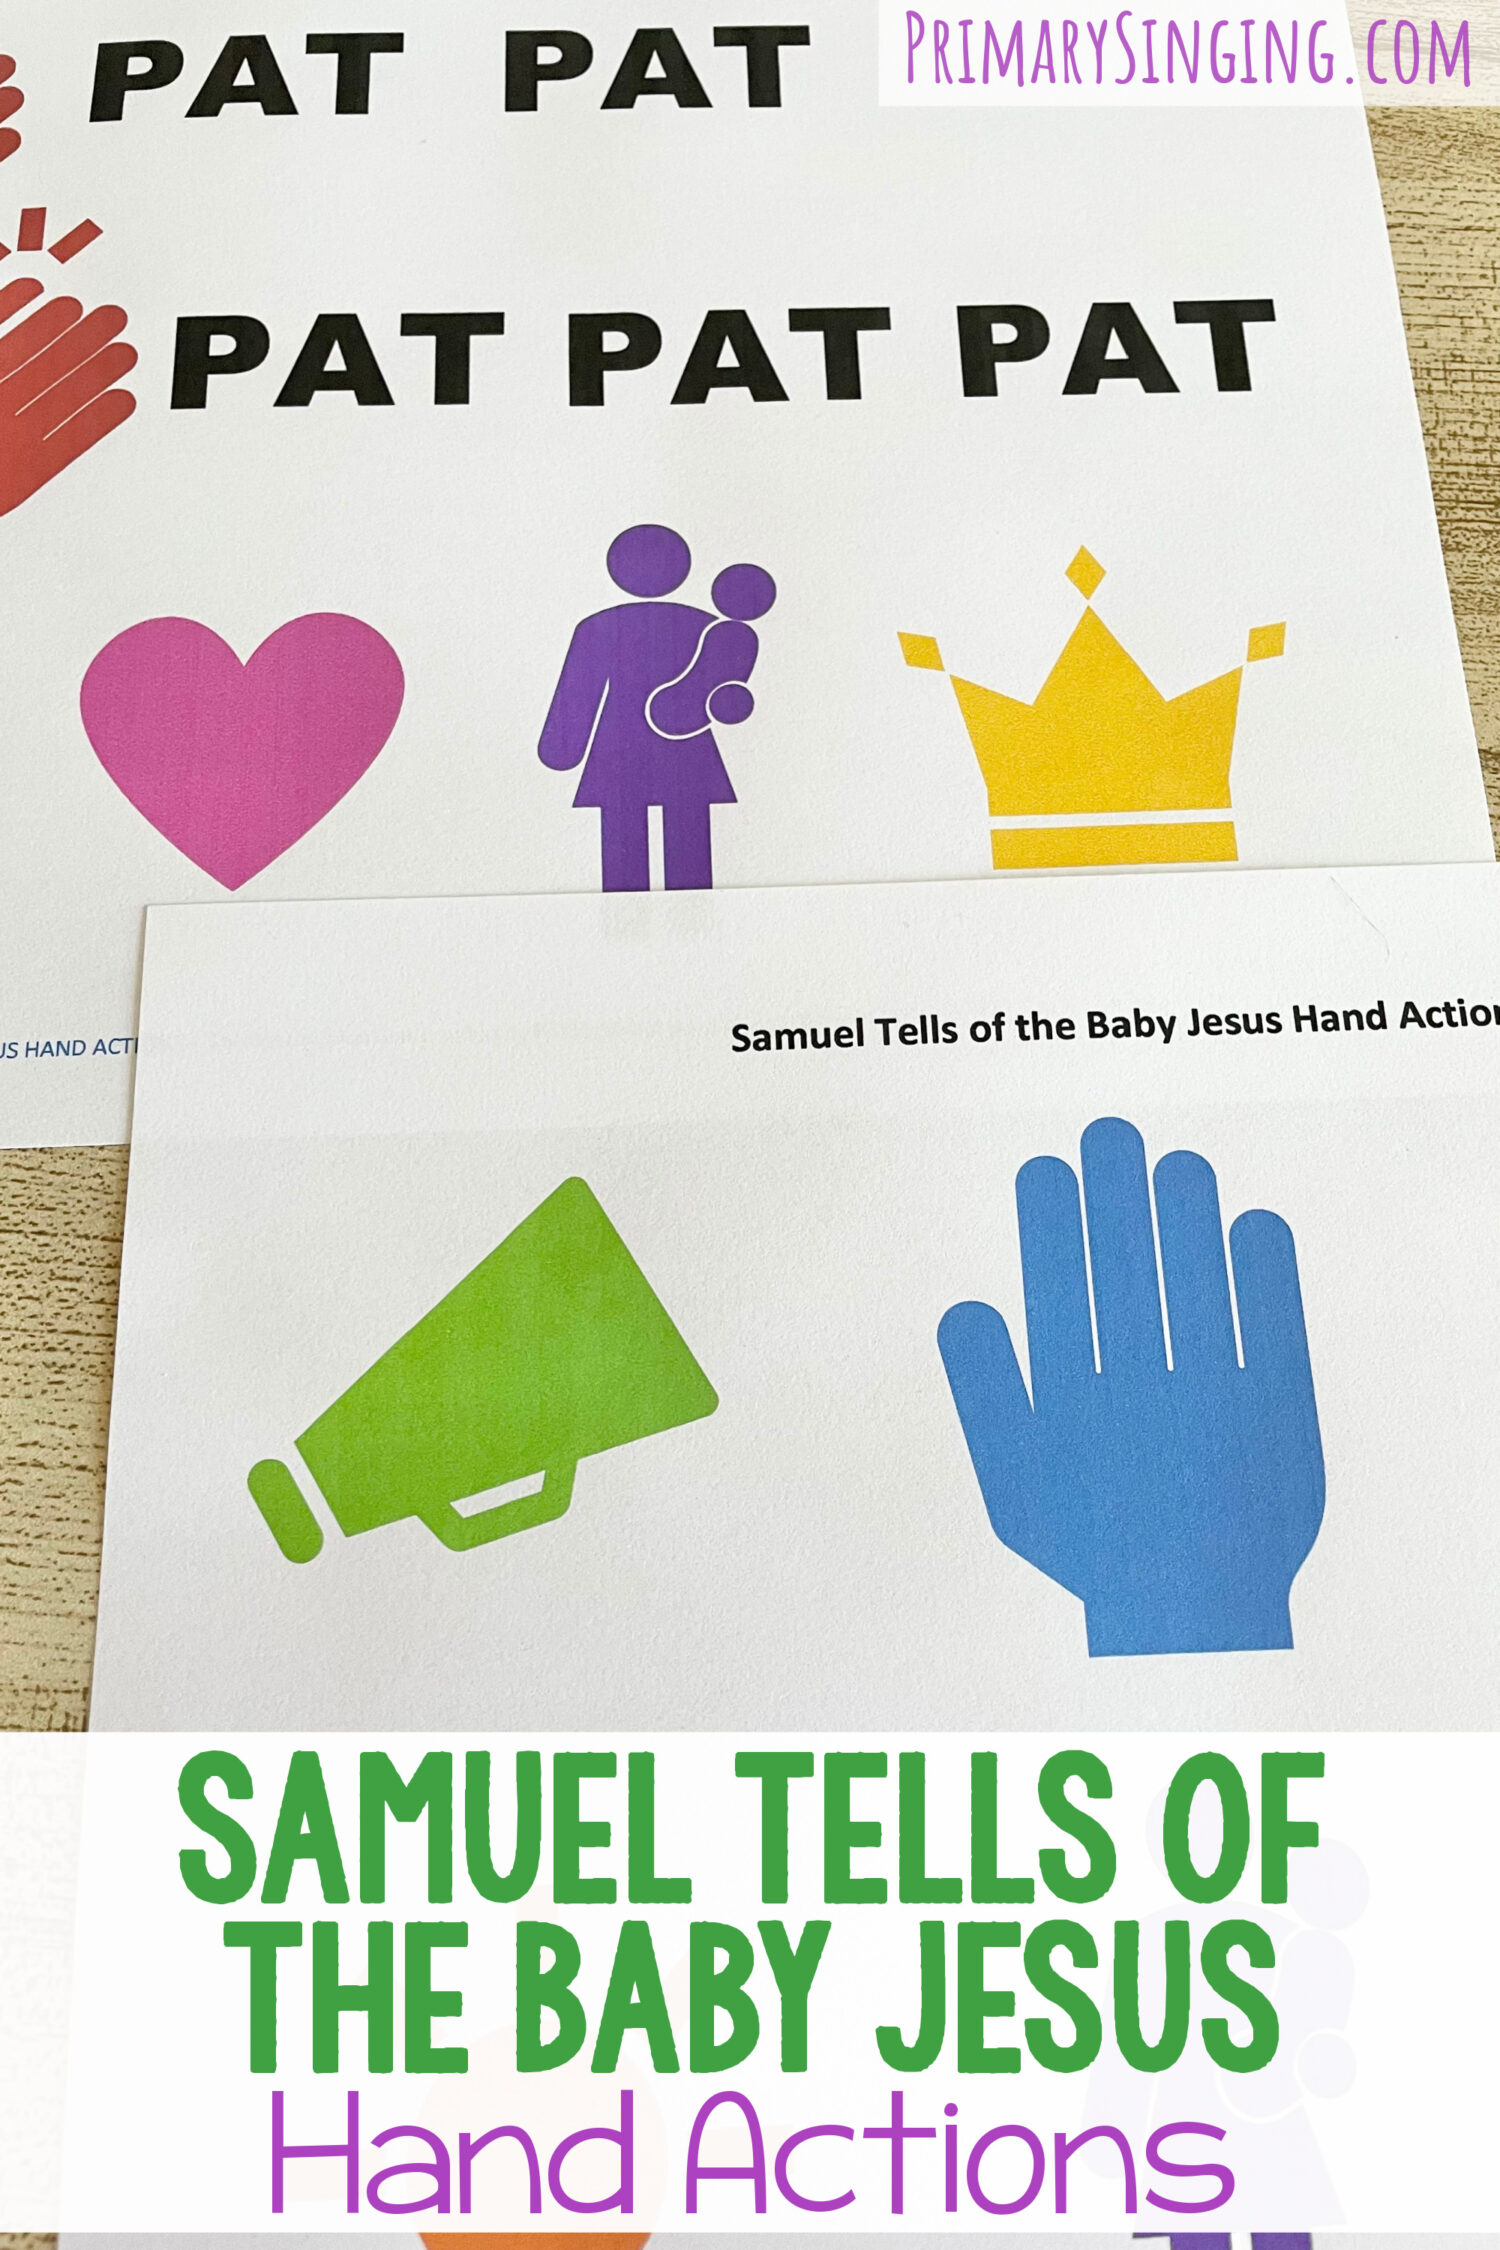 Samuel Tells of the Baby Jesus Hand Actions - you'll love using these hand actions to introduce or review this primary song with printable song helps for LDS Primary Music Leaders.